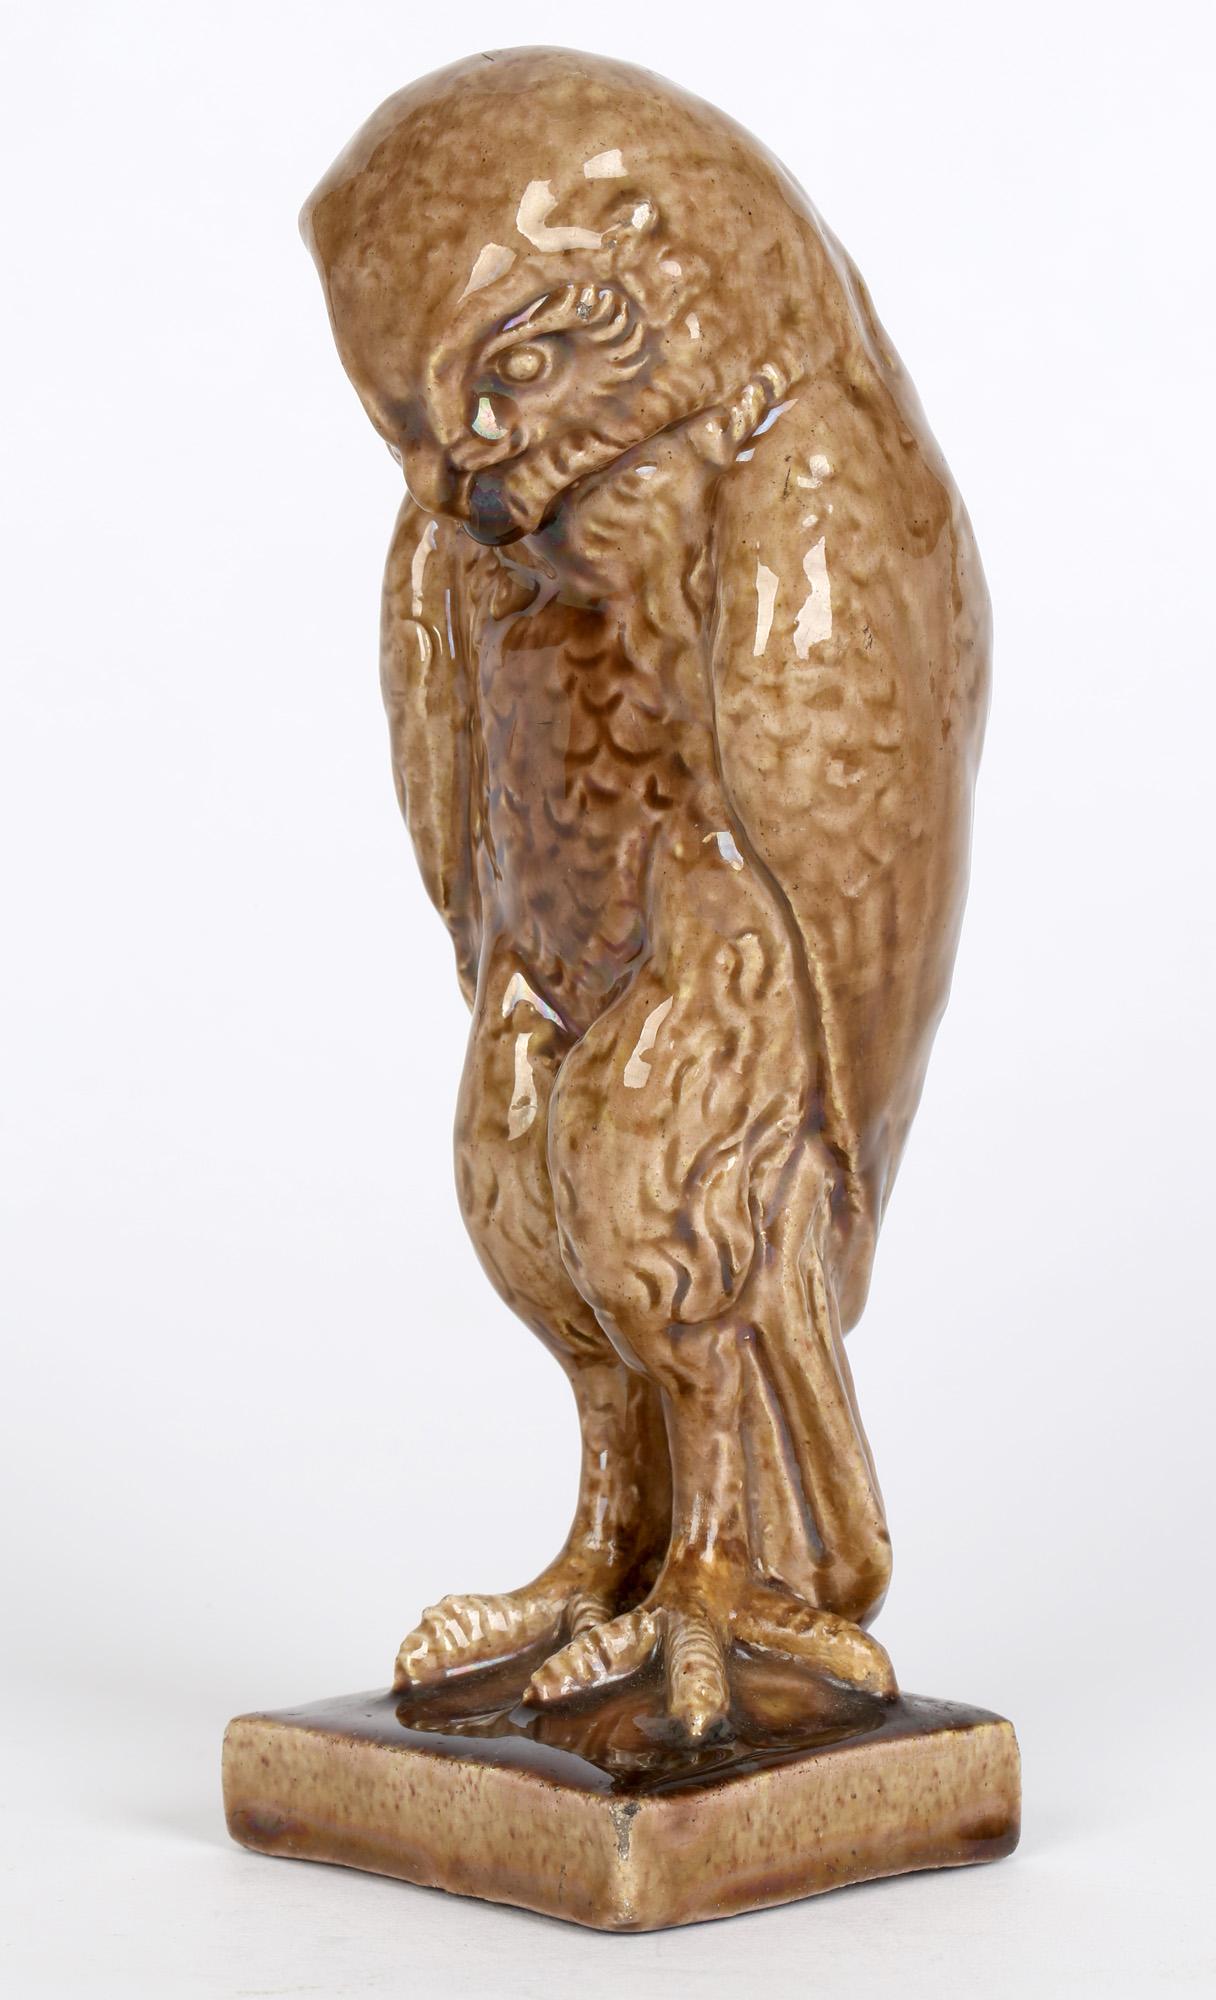 Dunmore Attributed Arts & Crafts Pottery Owl Figure 3